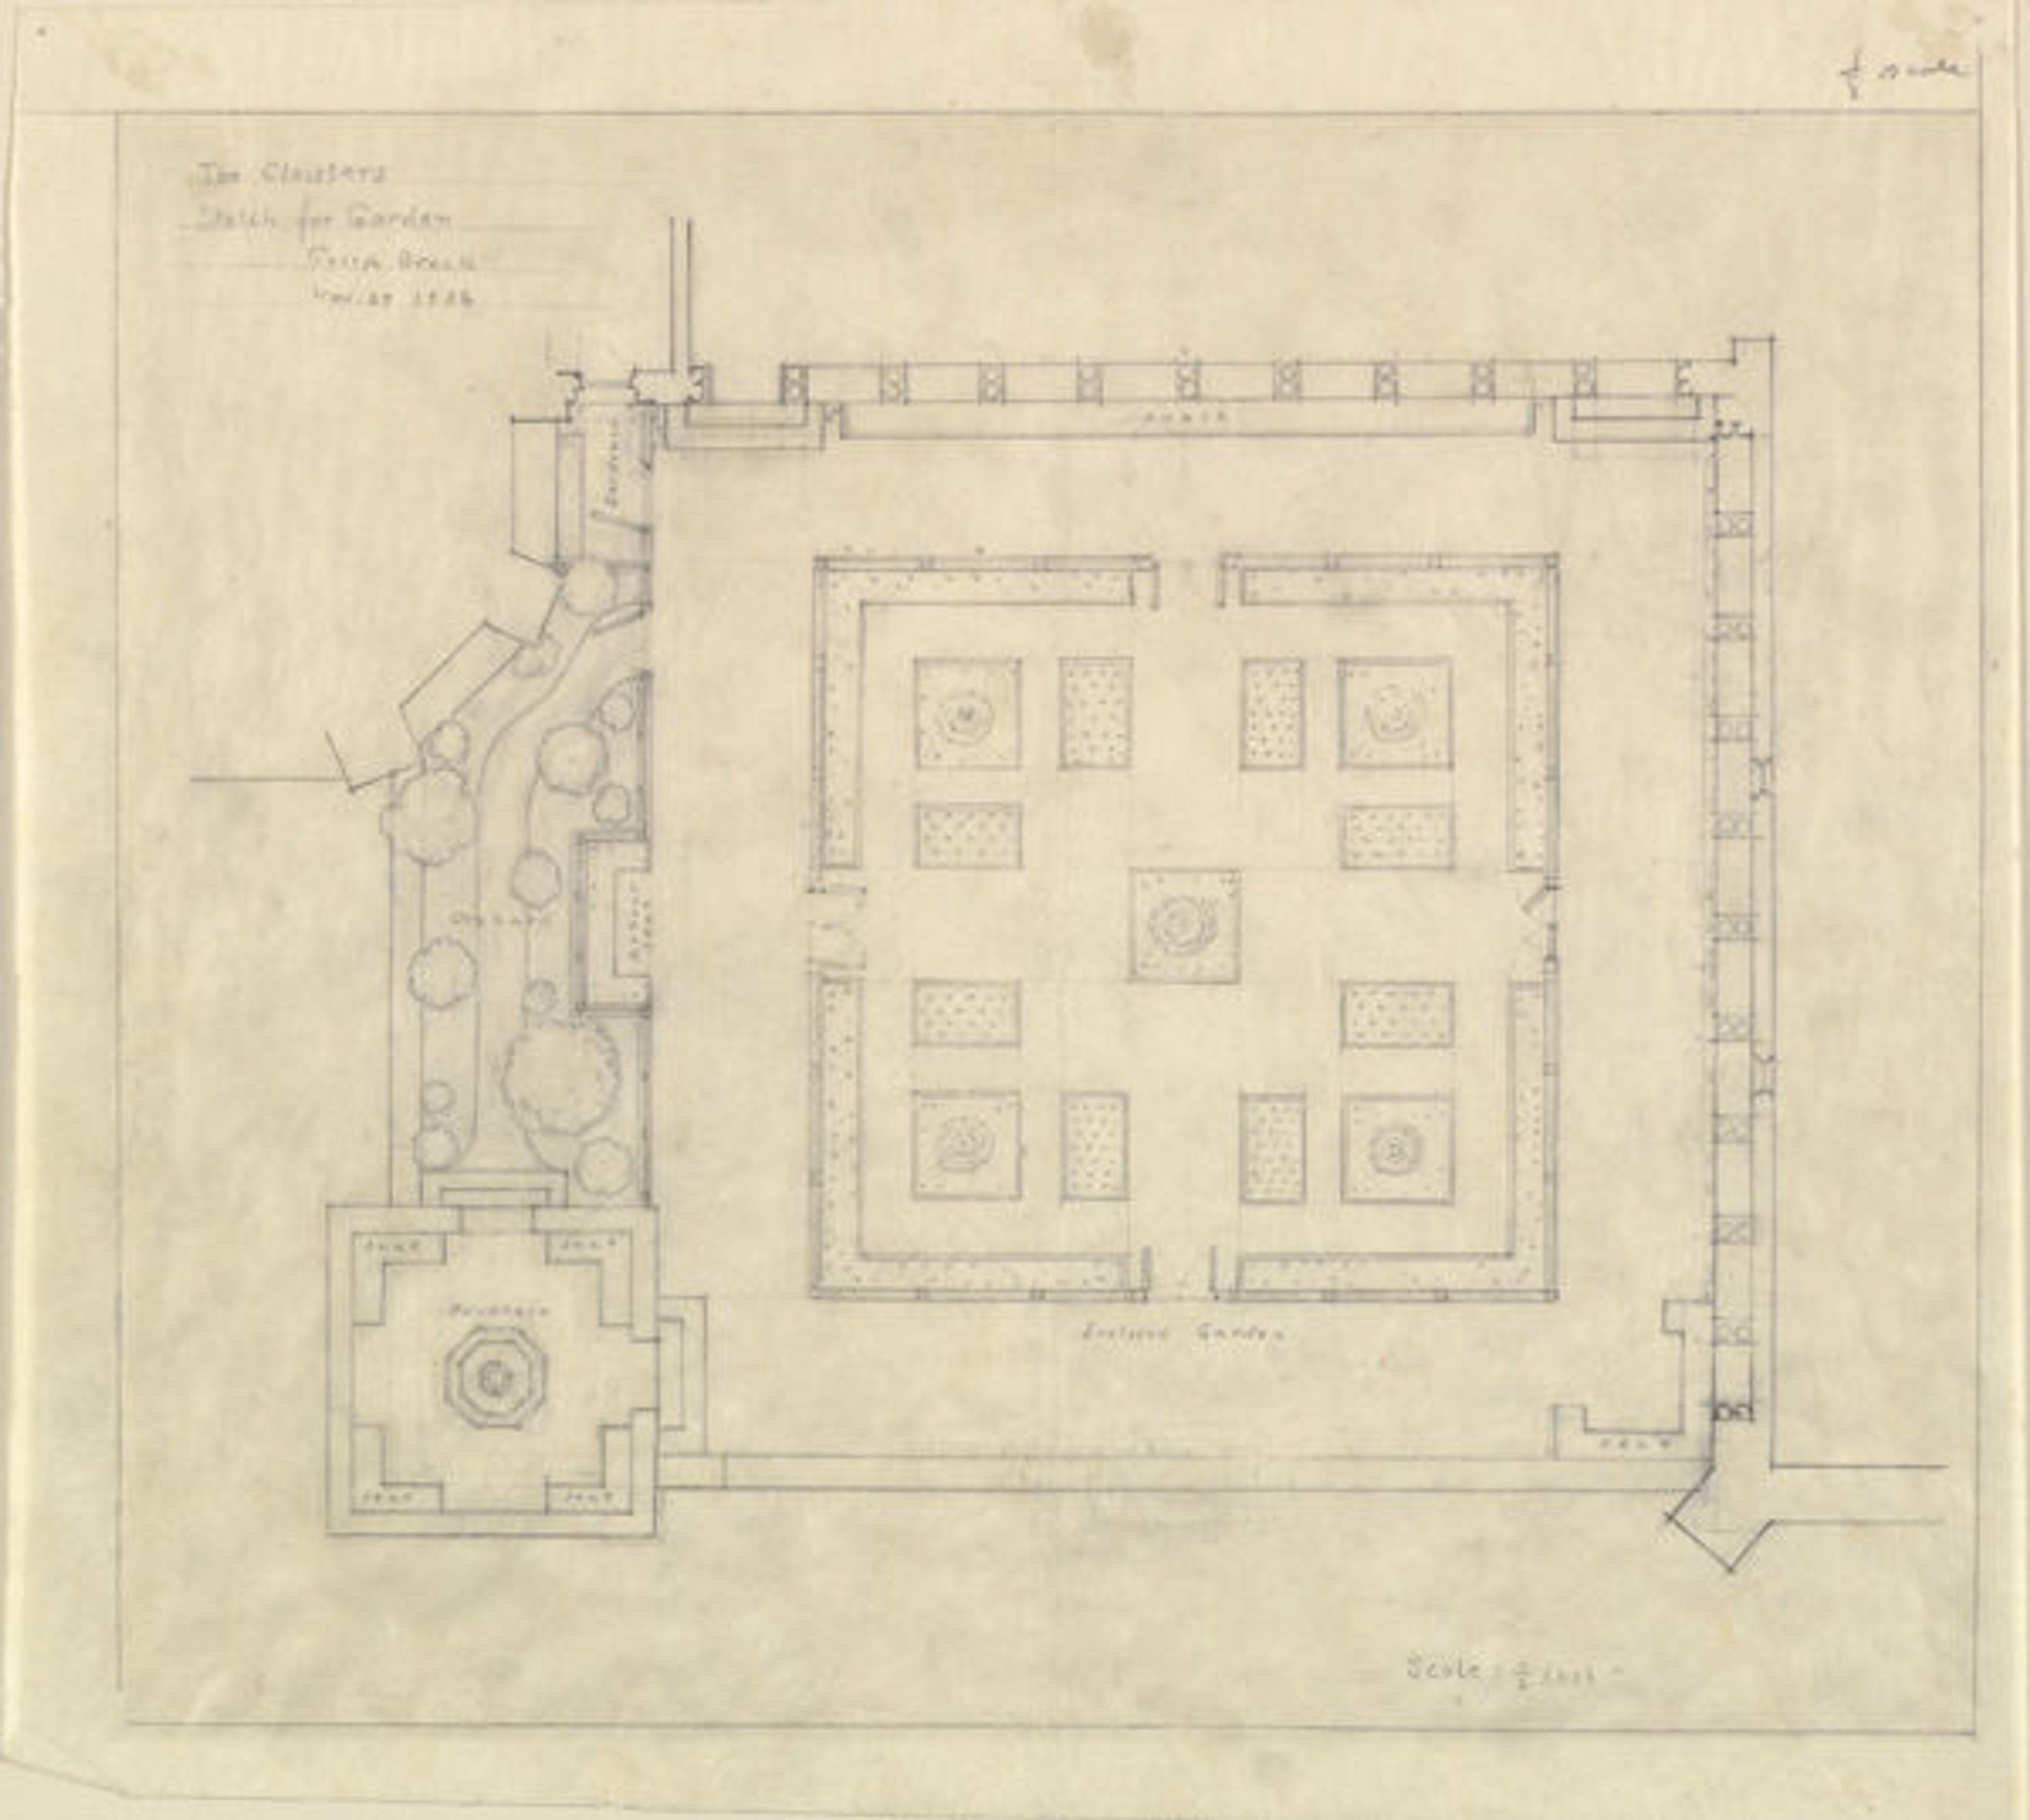 Joseph Breck (1885–1933). Plan for the Bonnefont Cloister garden for The Cloisters in Fort Tryon Park, signed 'Joseph Breck' and dated November 27, 1932. 